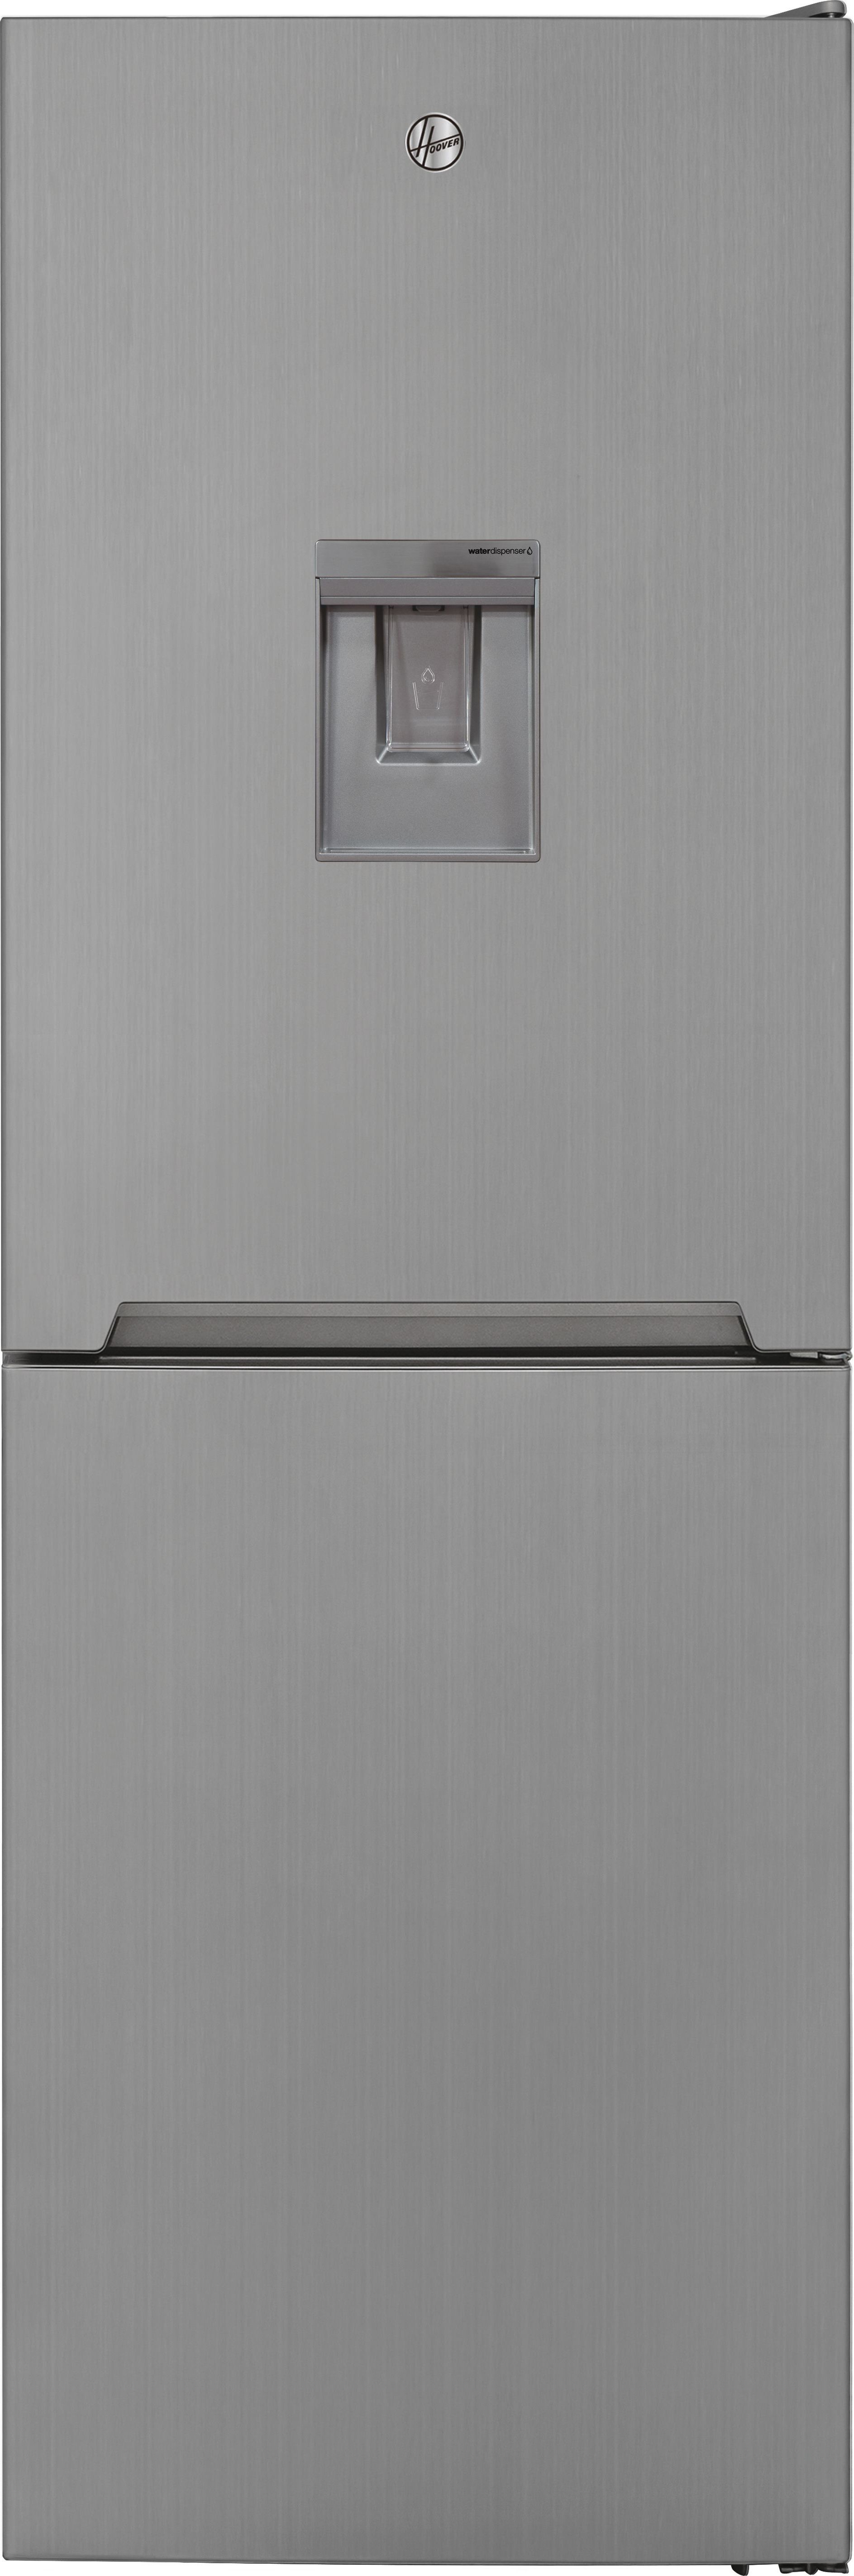 Hoover HOCV1T618EWXK 50/50 No Frost Fridge Freezer - Silver - E Rated, Silver